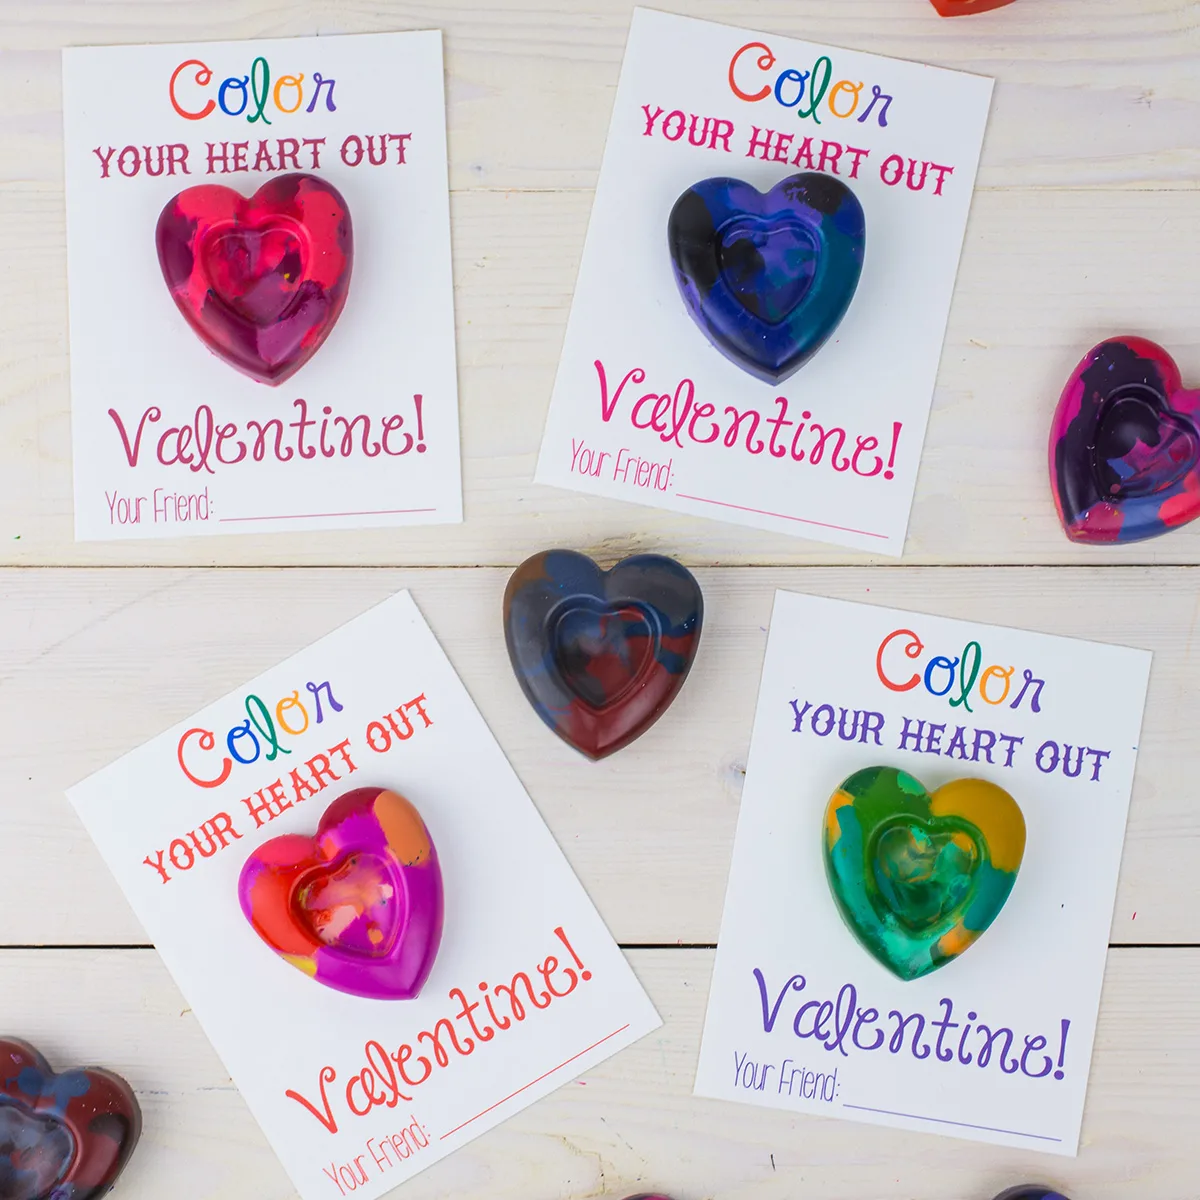 Crayon Valentines Non-Candy Valentine Card Ideas Non-Candy Valentine Card Ideas. Check out these free printable non-candy Valentine card ideas that are sure to melt your heart without adding sugar to your child's diet!